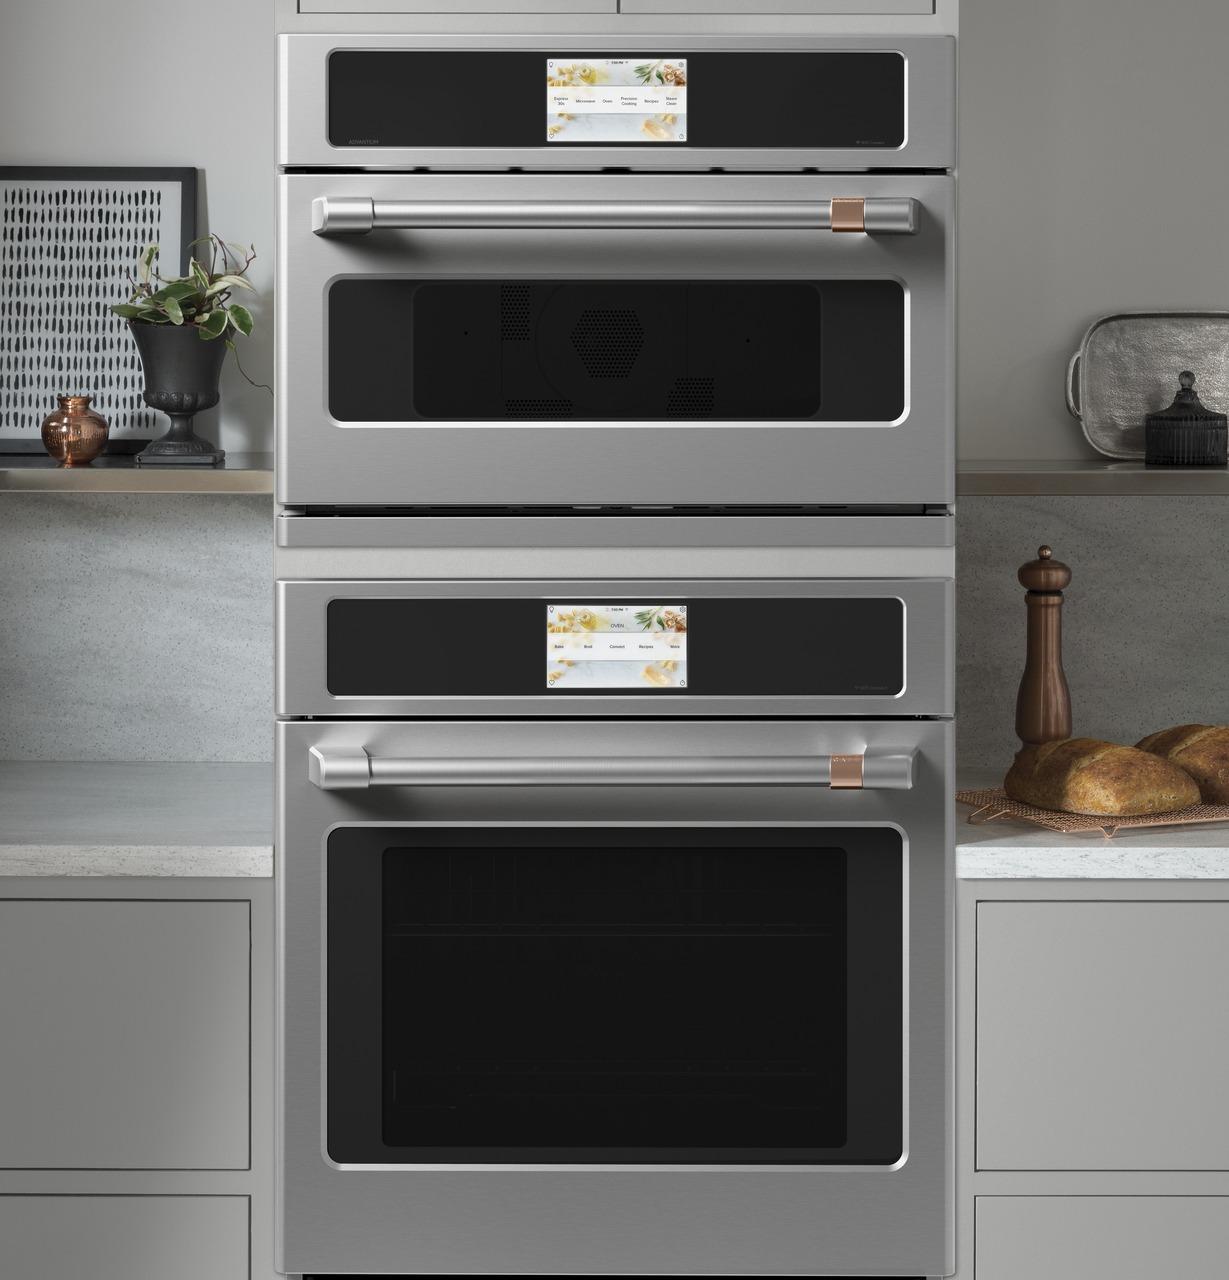 Cafe Caf(eback)™ 30" Smart Five in One Wall Oven with 240V Advantium® Technology